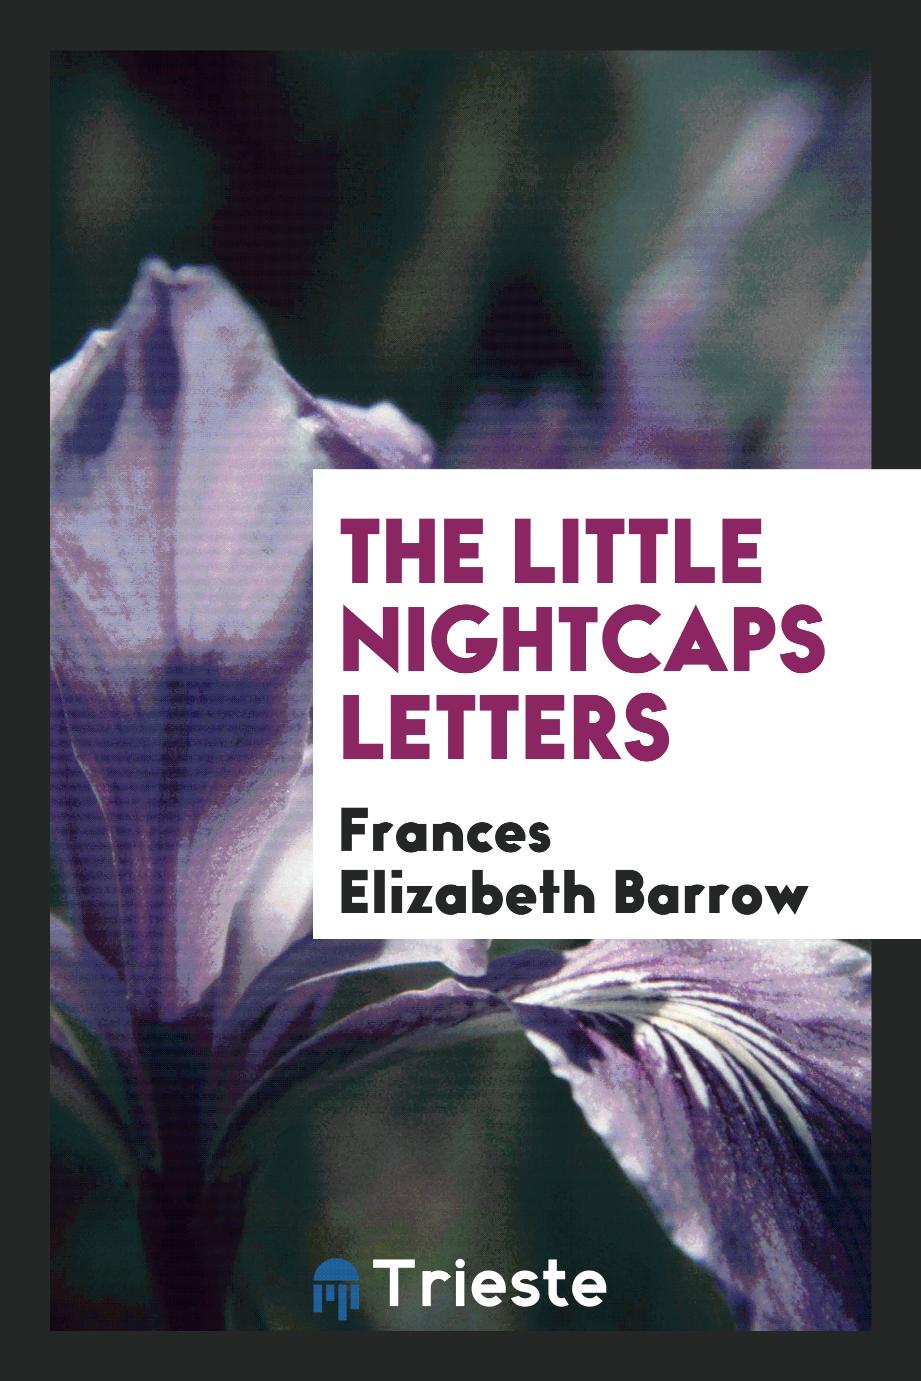 The Little nightcaps letters